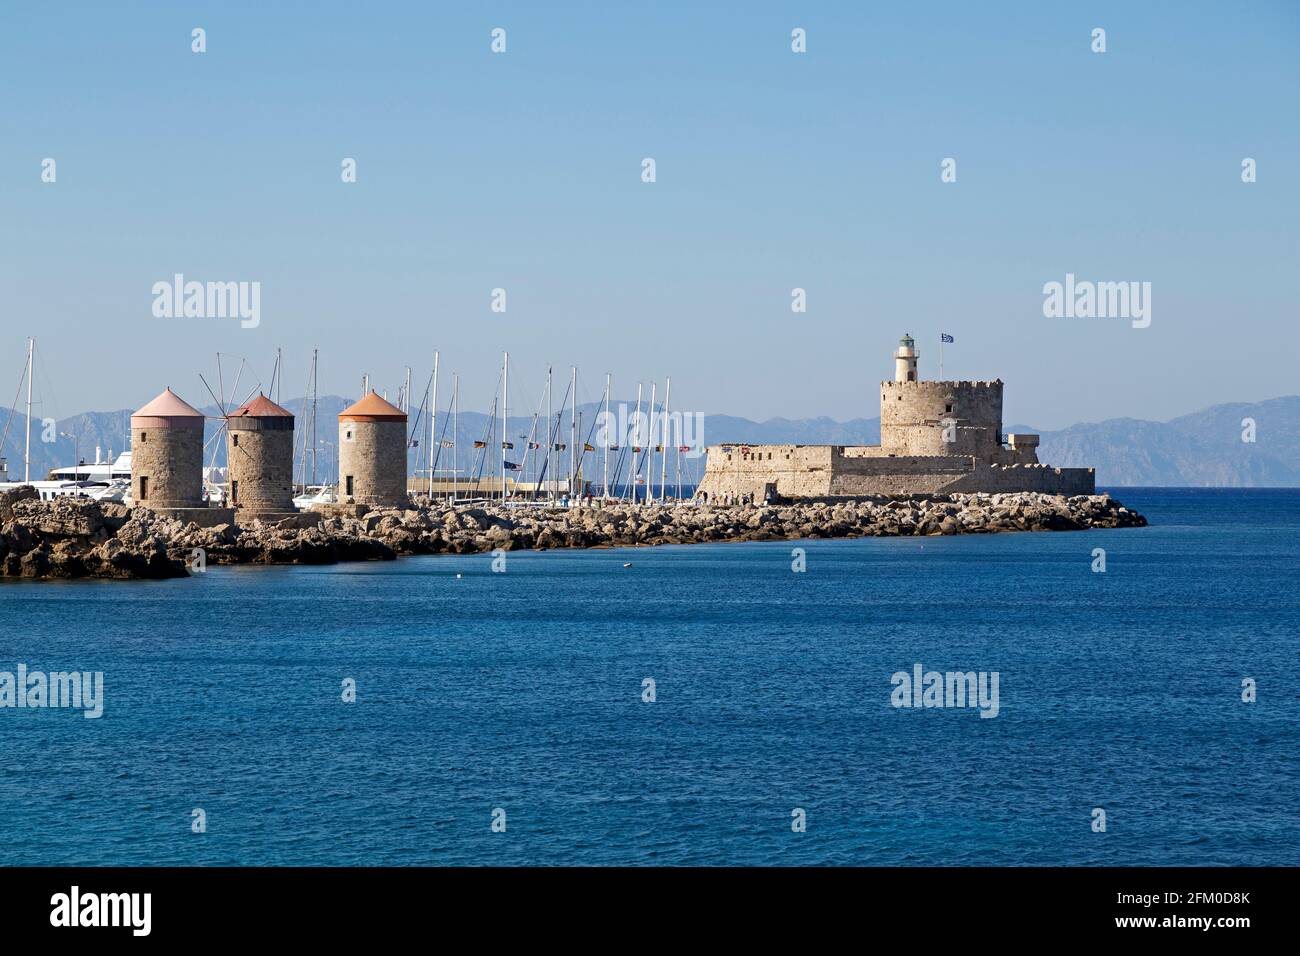 The Fort of St Nicholas in the city of Rhodes in Greece. The 15th century fortress iis on a harbour wall with the three stone Windmills of Mandraki. Stock Photo